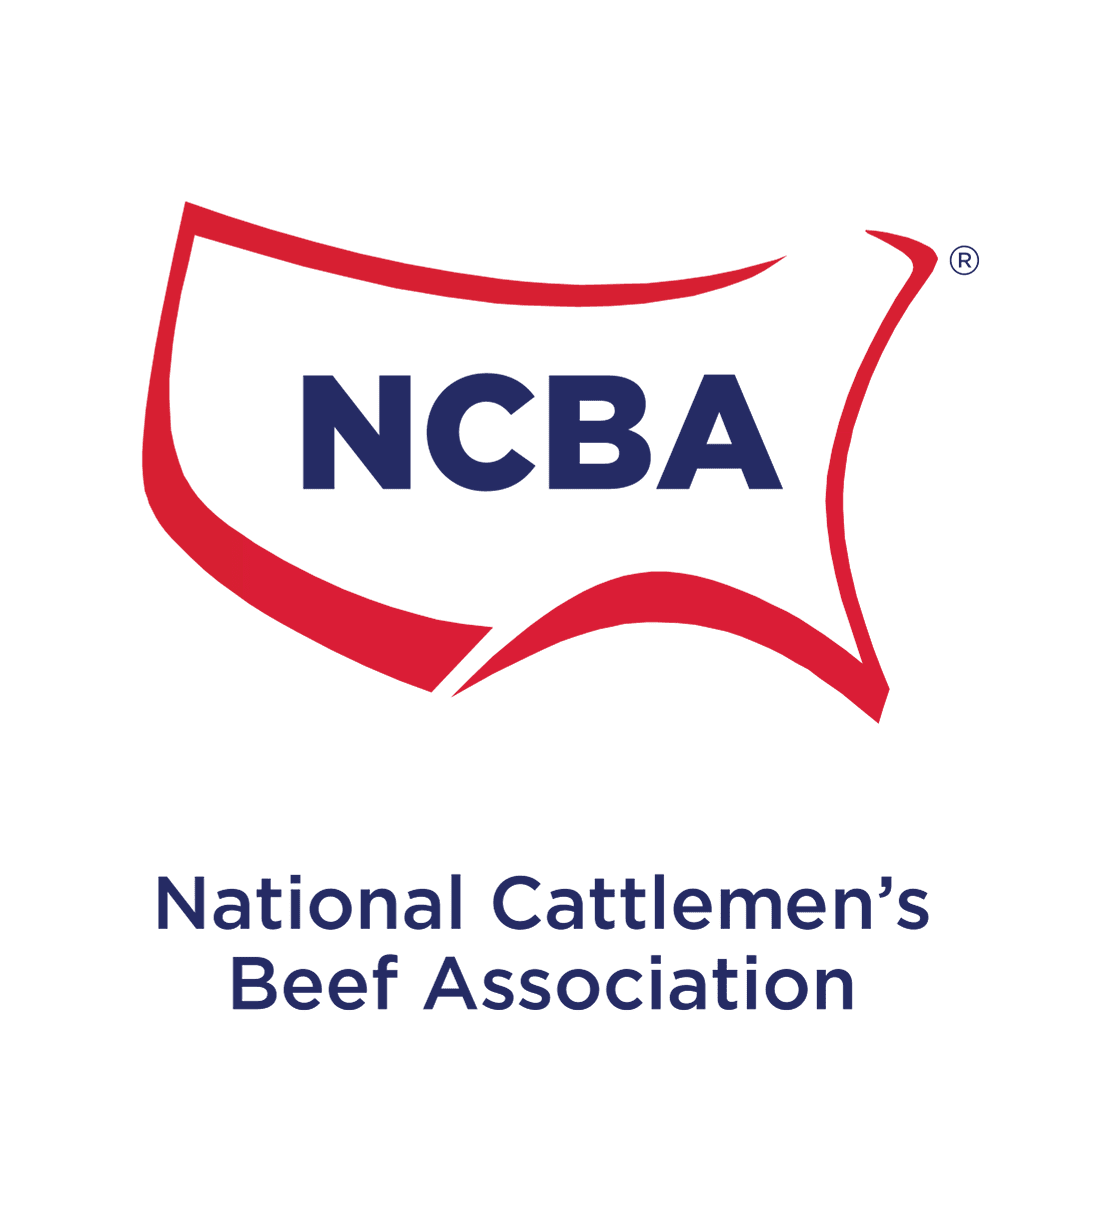 This is the logo for the National Cattlemen's Beef Association.